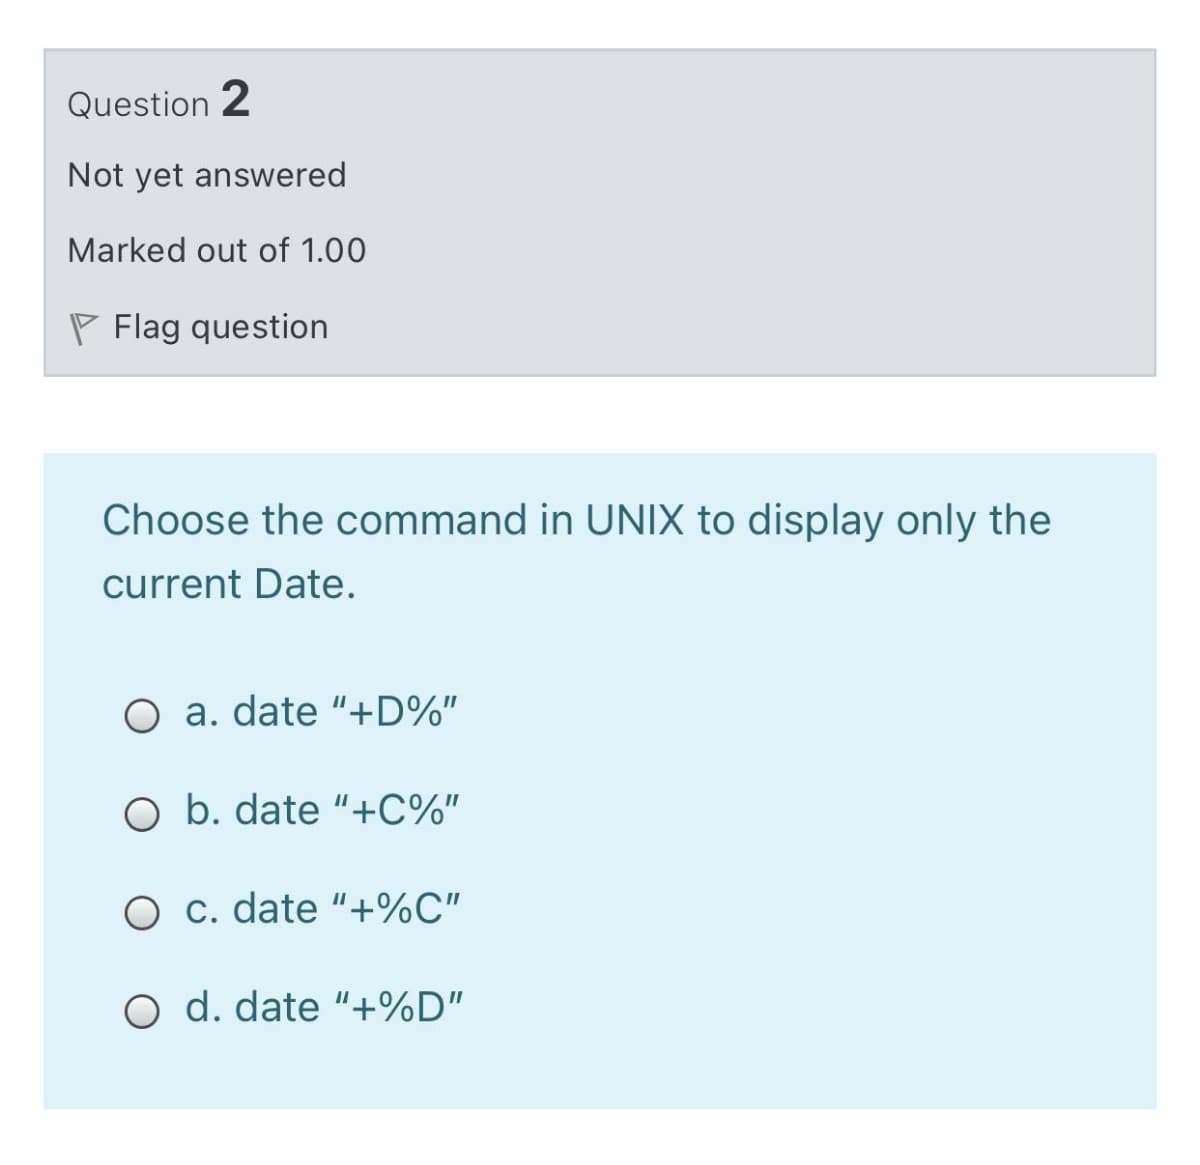 Question 2
Not yet answered
Marked out of 1.00
P Flag question
Choose the command in UNIX to display only the
current Date.
O a. date "+D%"
O b. date "+C%"
O c. date “+%C"
O d. date "+%D"
